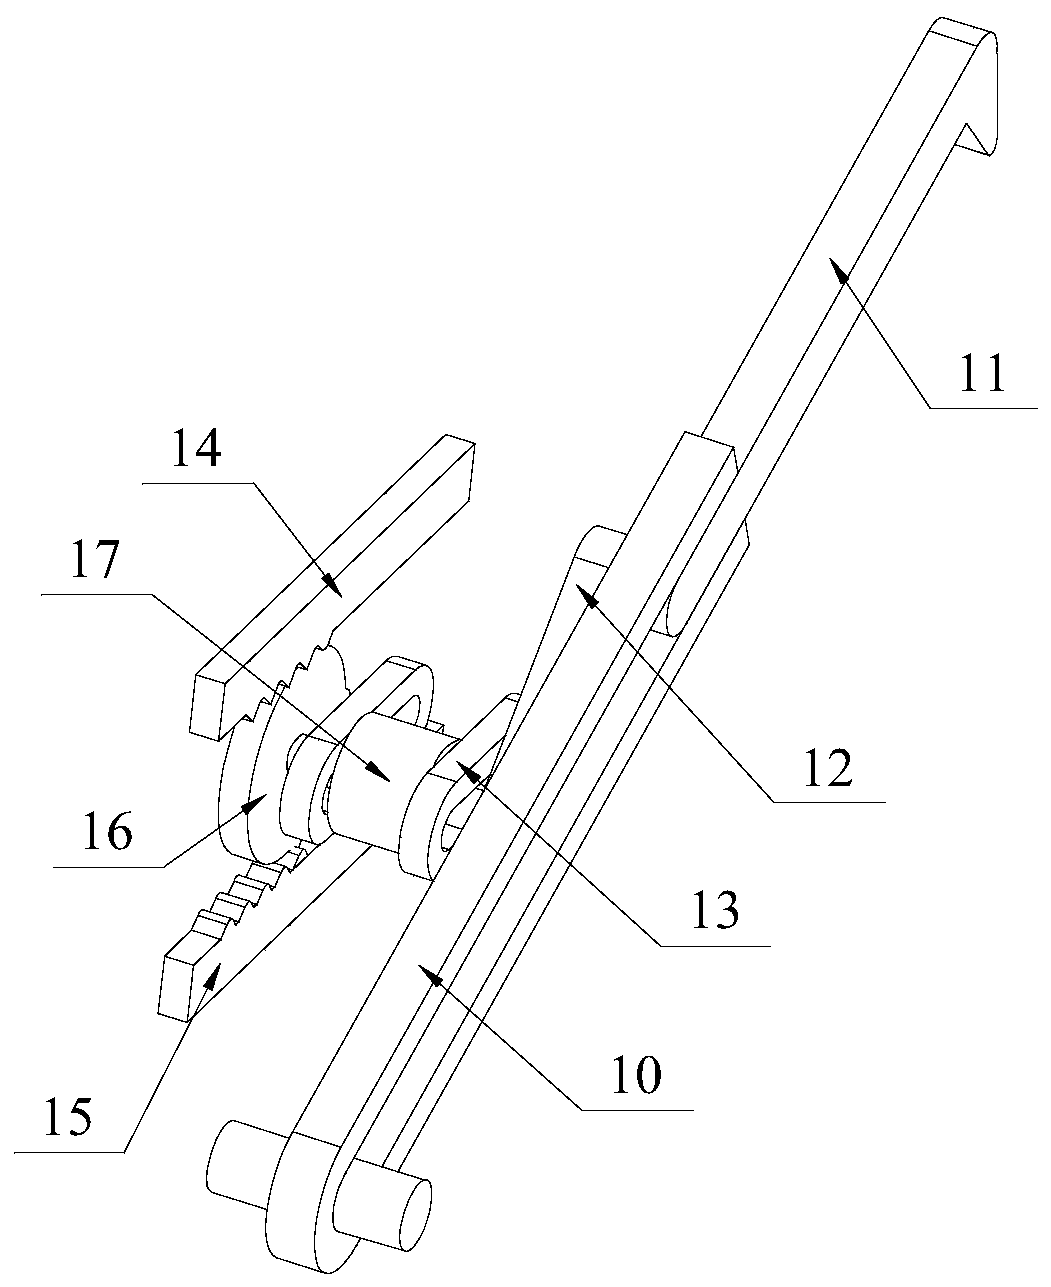 An intermittent conveying device